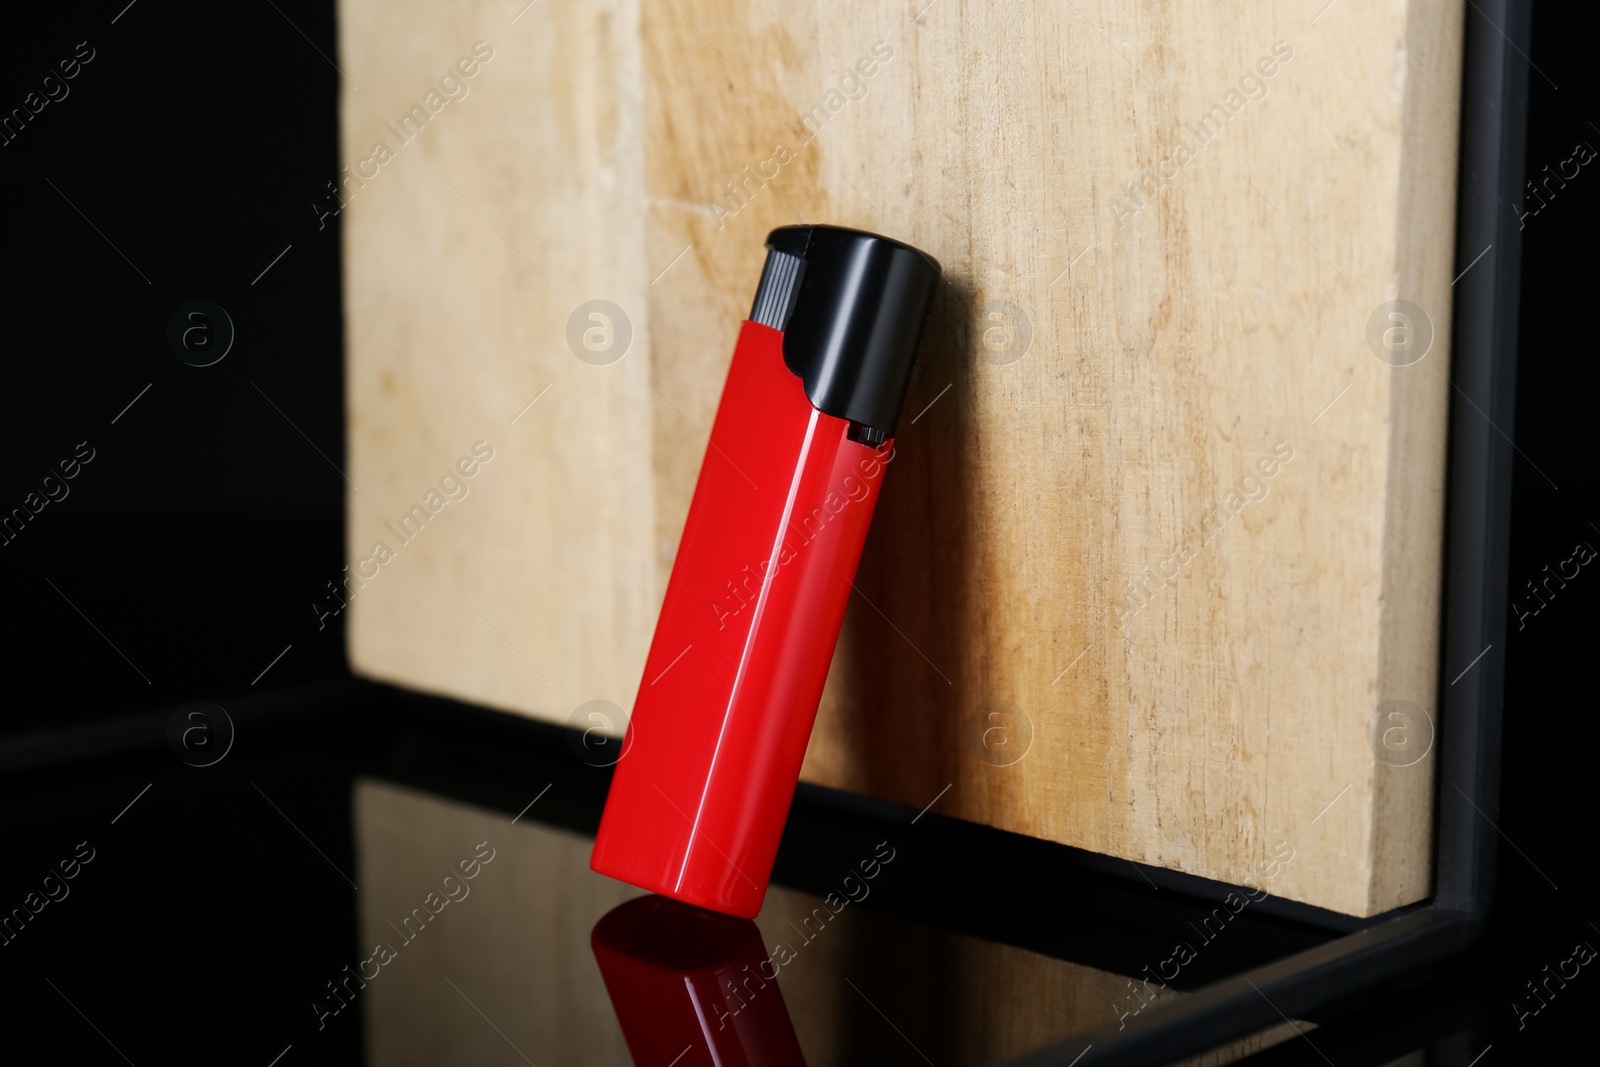 Photo of Stylish presentation of red plastic cigarette lighter near wooden surface